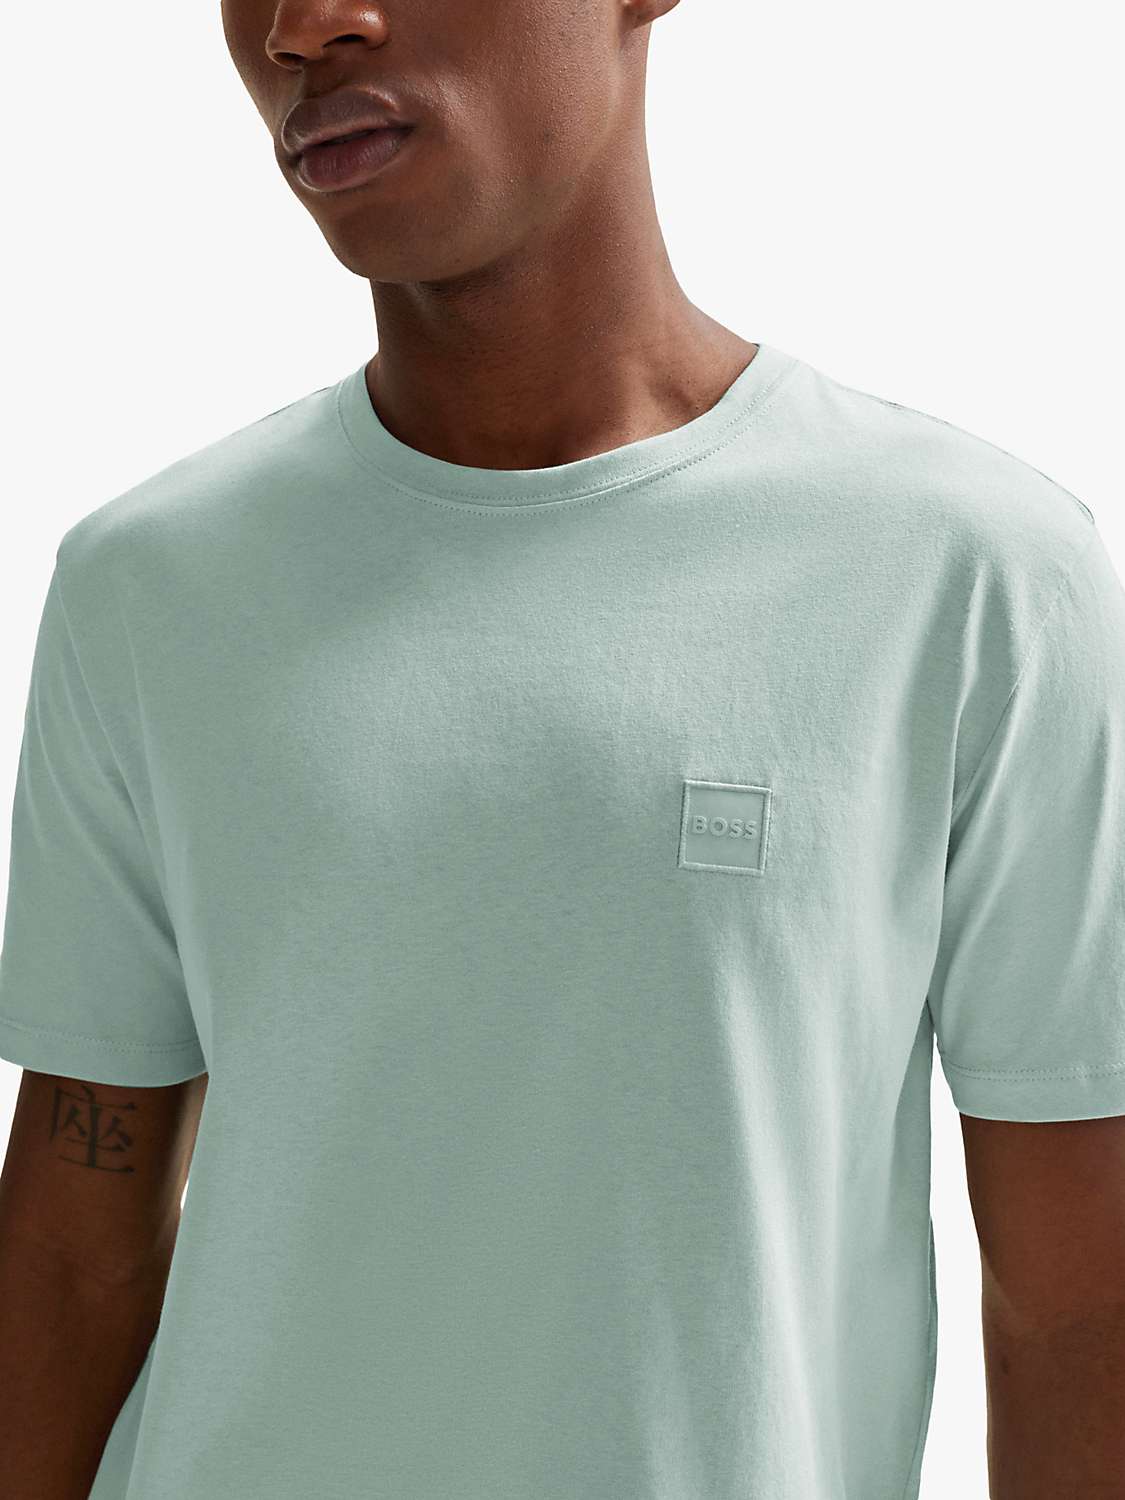 Buy BOSS Tales 446 Short Sleeve T-Shirt, Turquoise Online at johnlewis.com